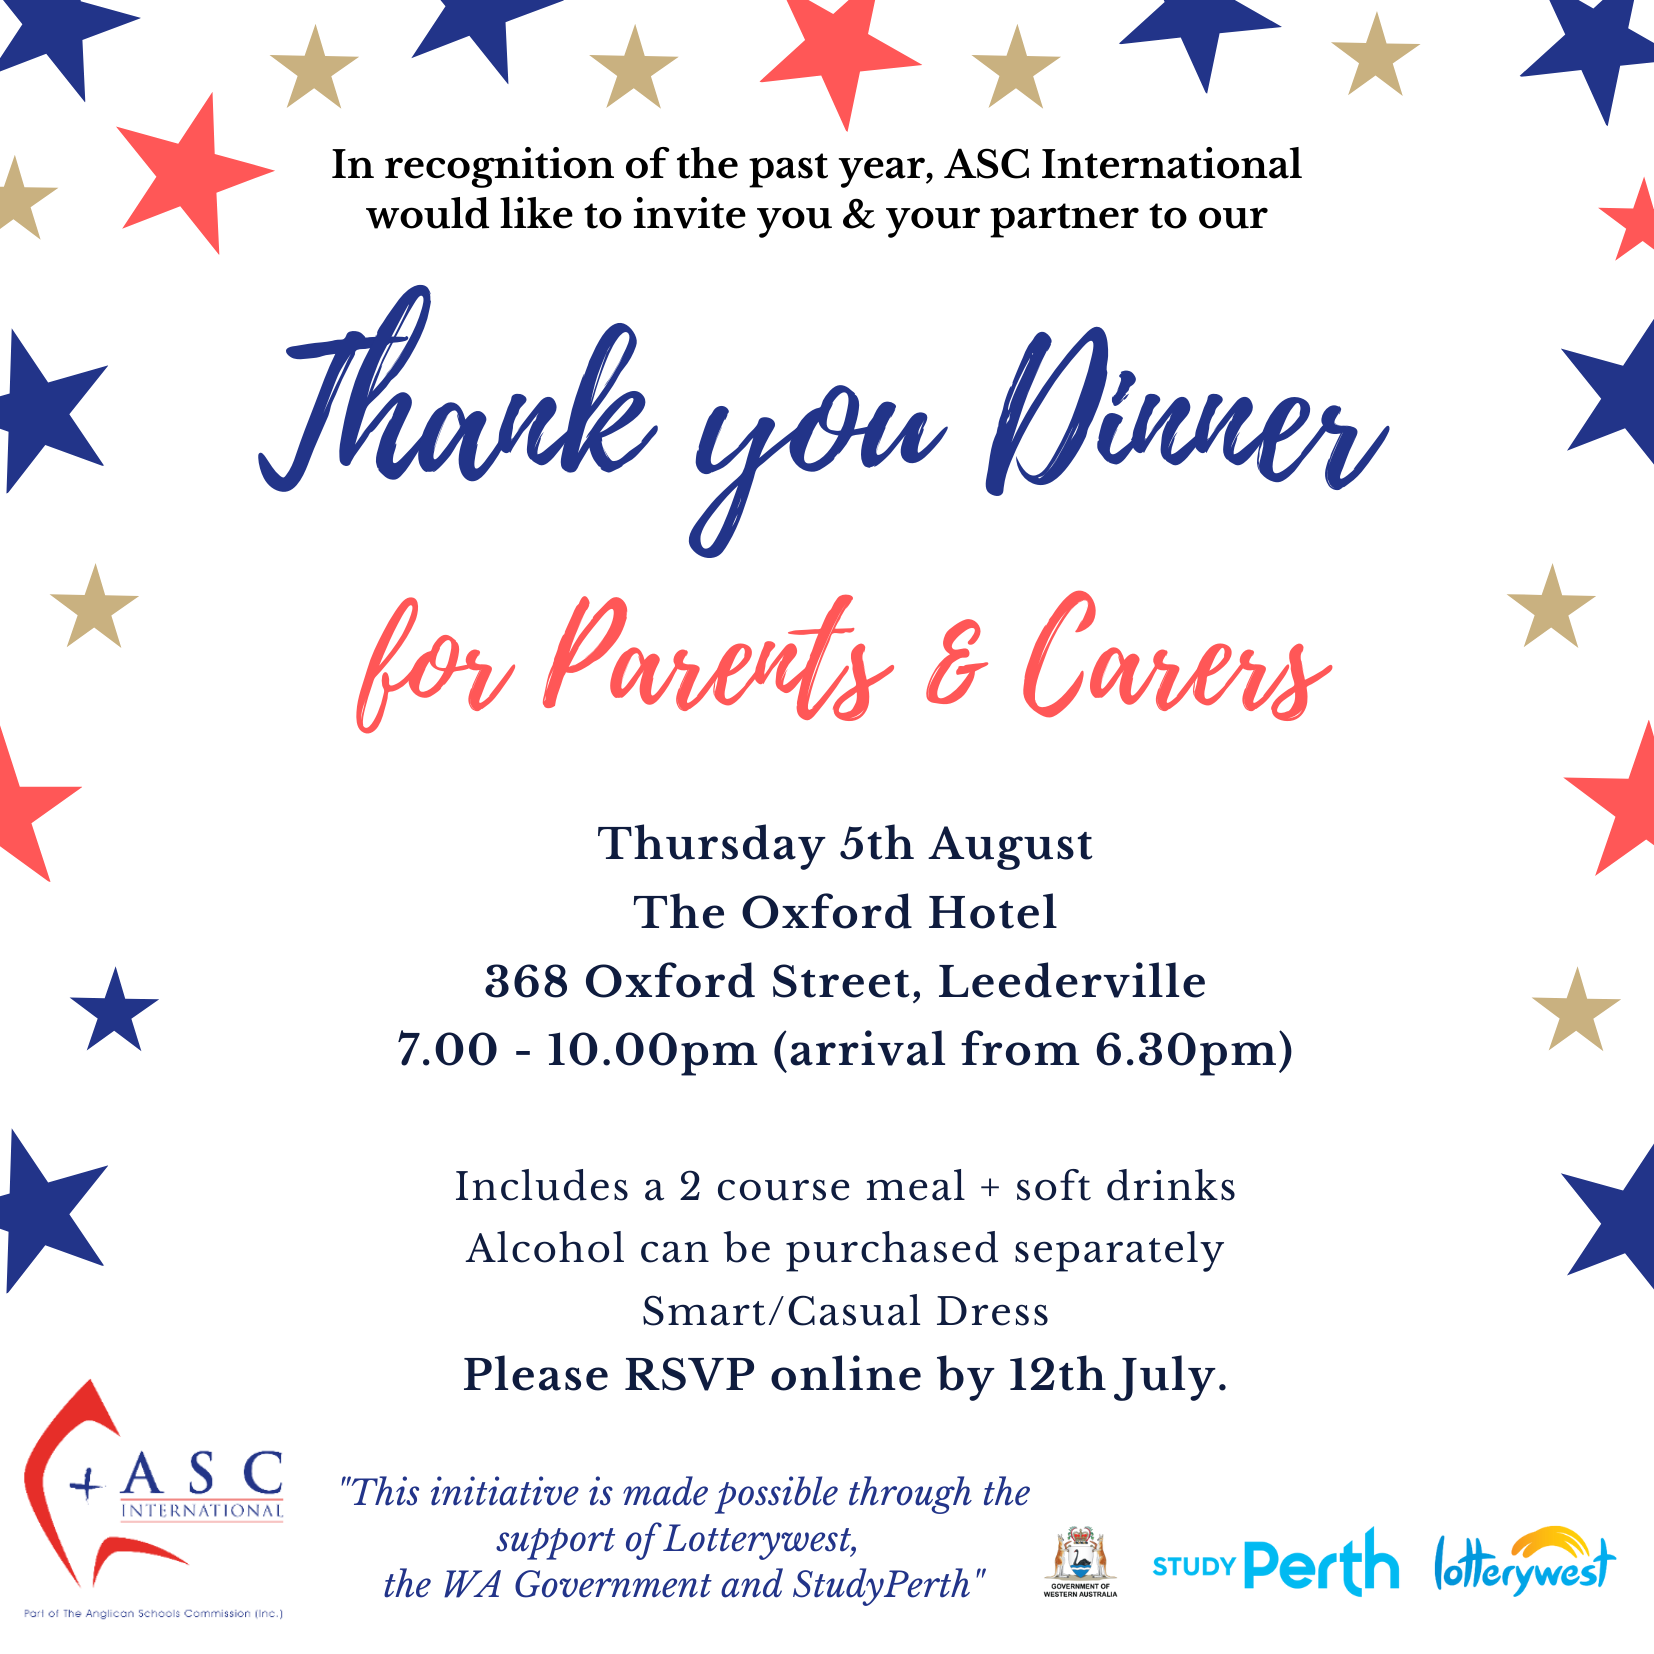 Thank You Dinner for Parents and Carers - Anglican Schools Commission